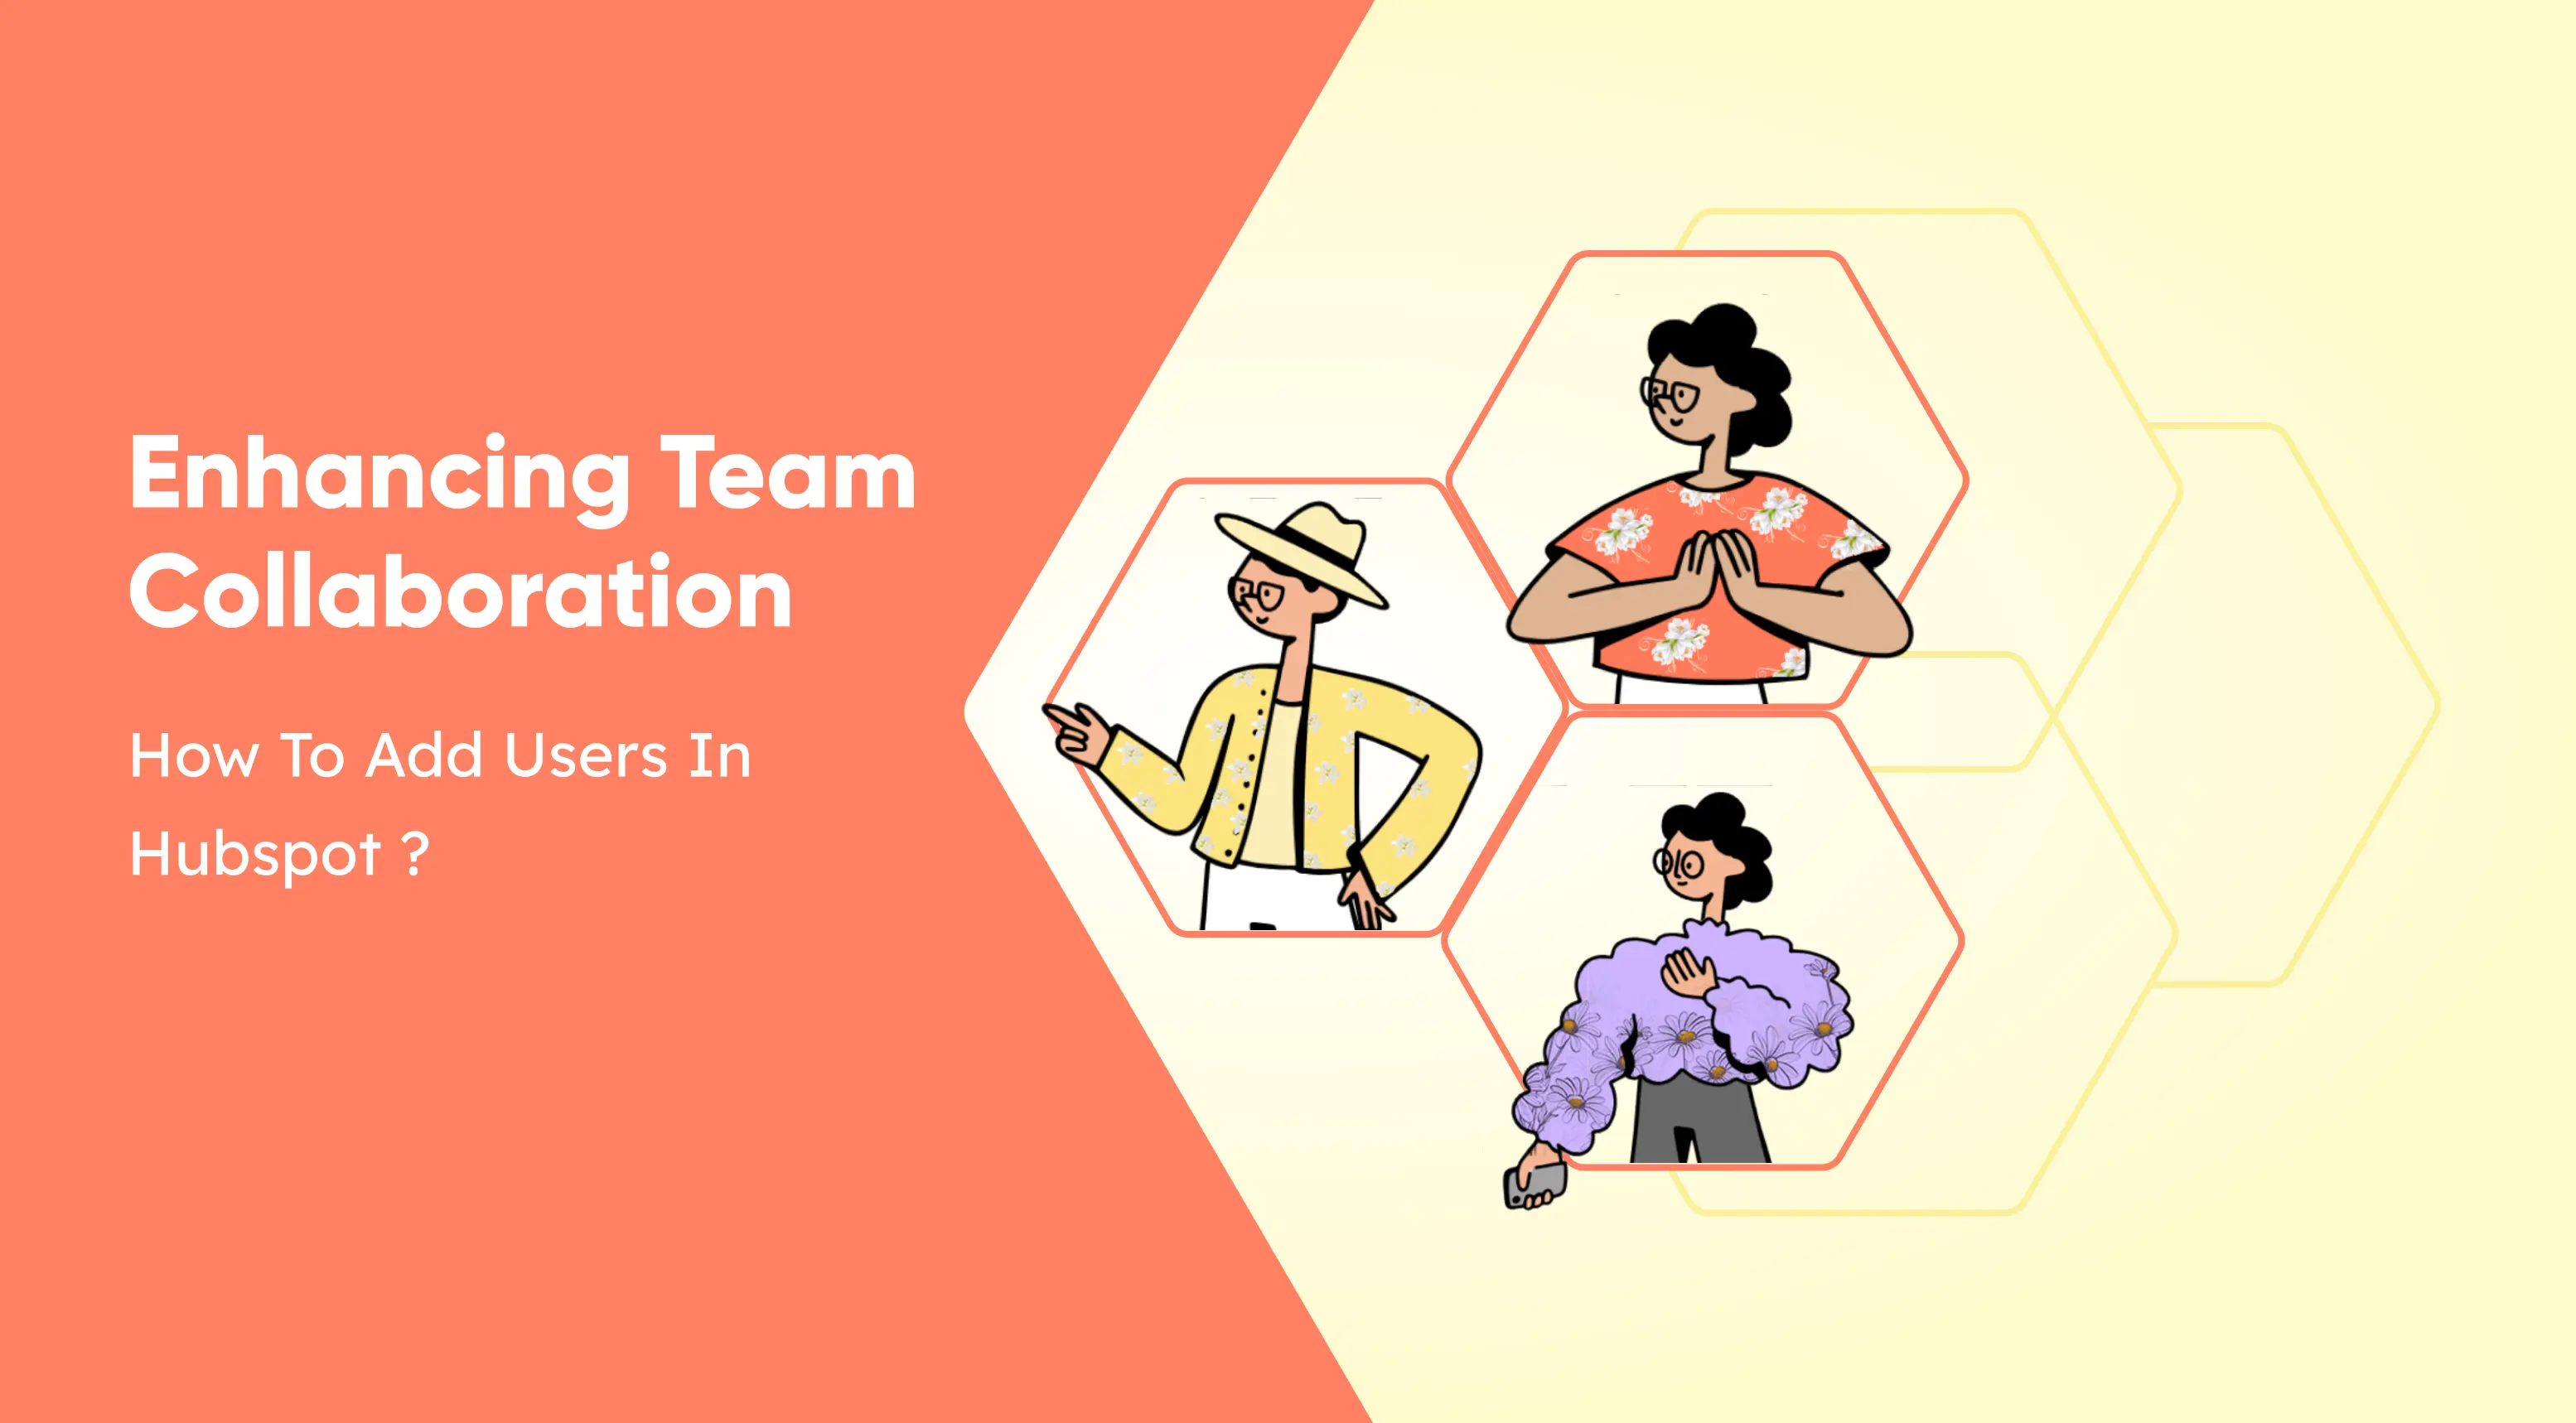 Enhancing Team Collaboration - How to Add Users in Hubspot ?